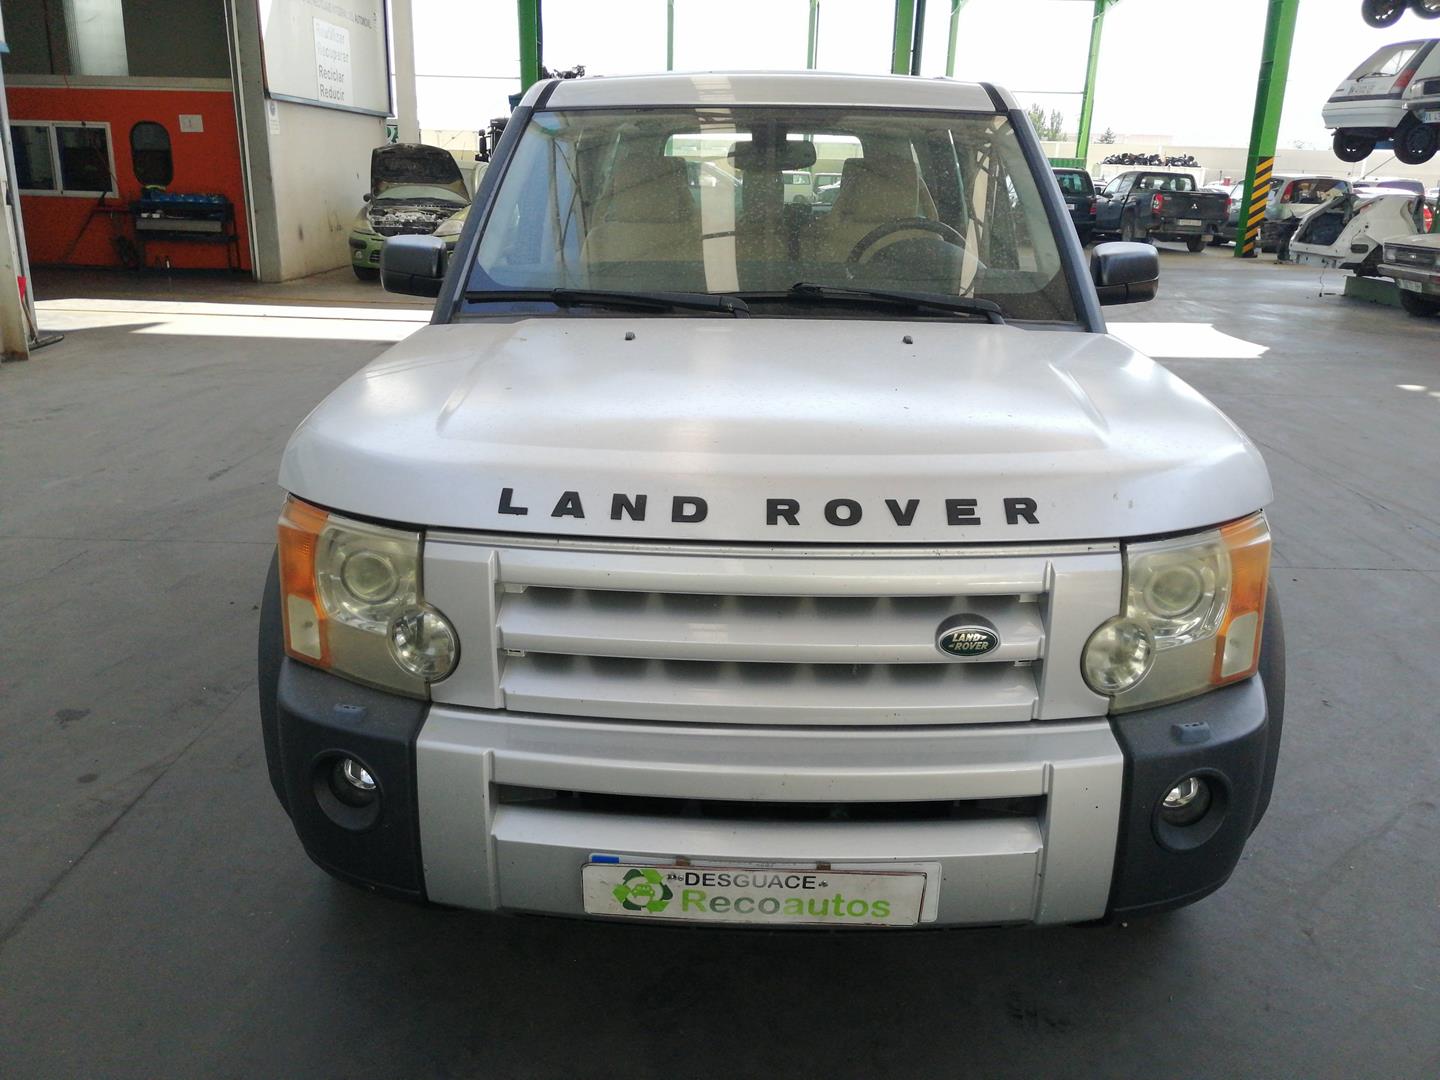 LAND ROVER Discovery 4 generation (2009-2016) Other Engine Compartment Parts PIB500052 21105990